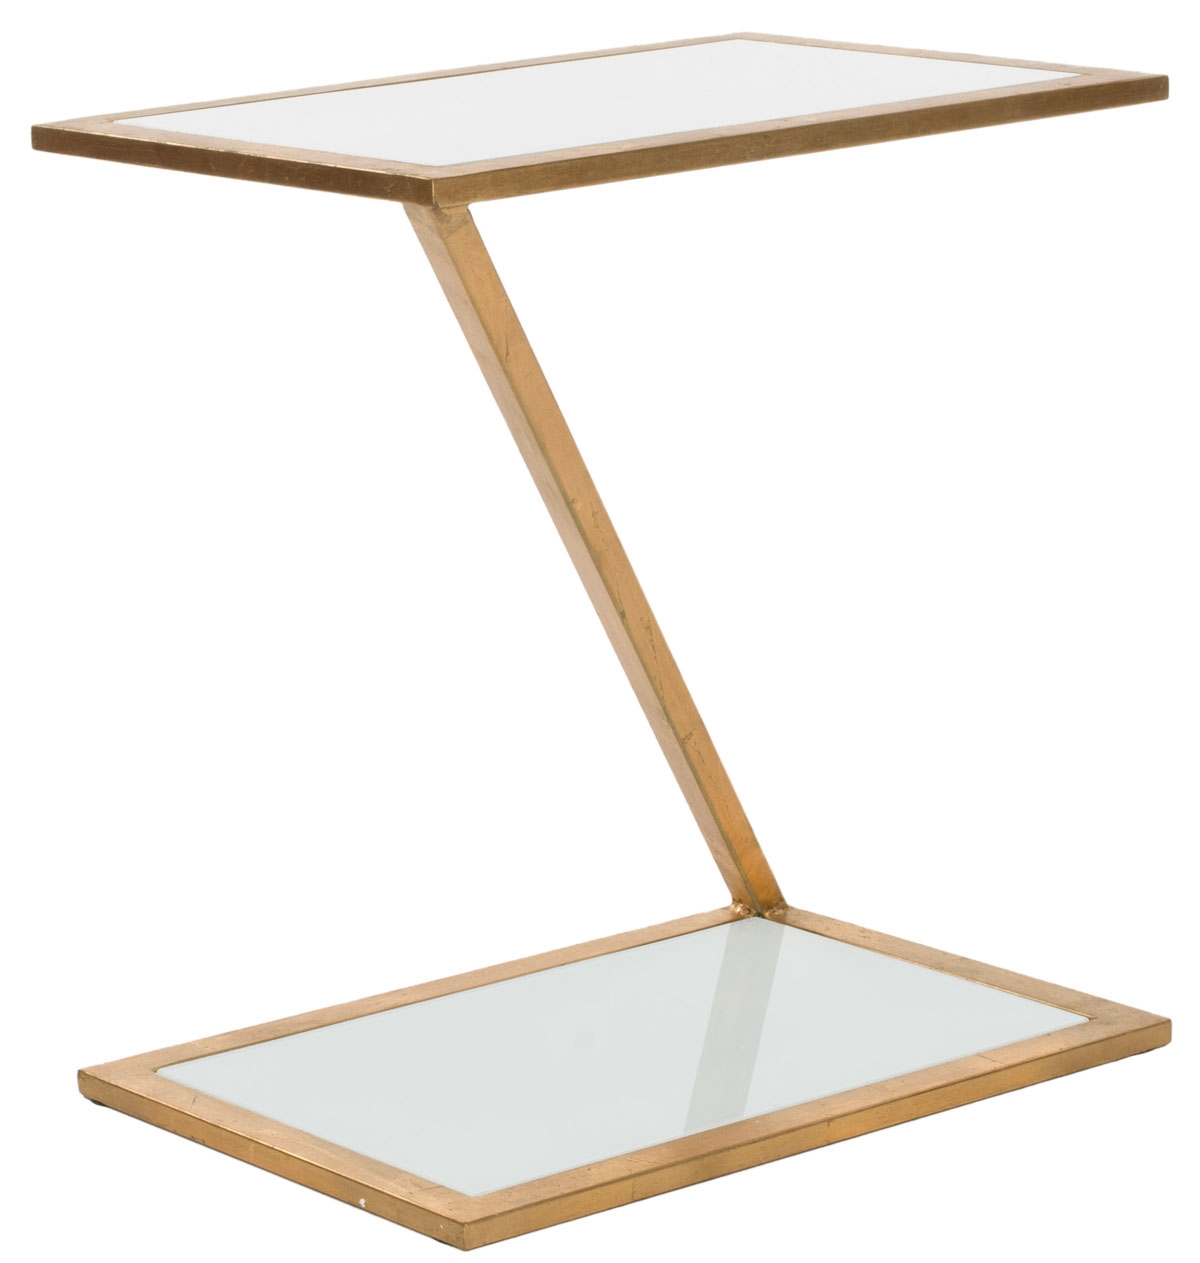 Andrea Glass Top Accent Table - Gold/White - Arlo Home - Image 1